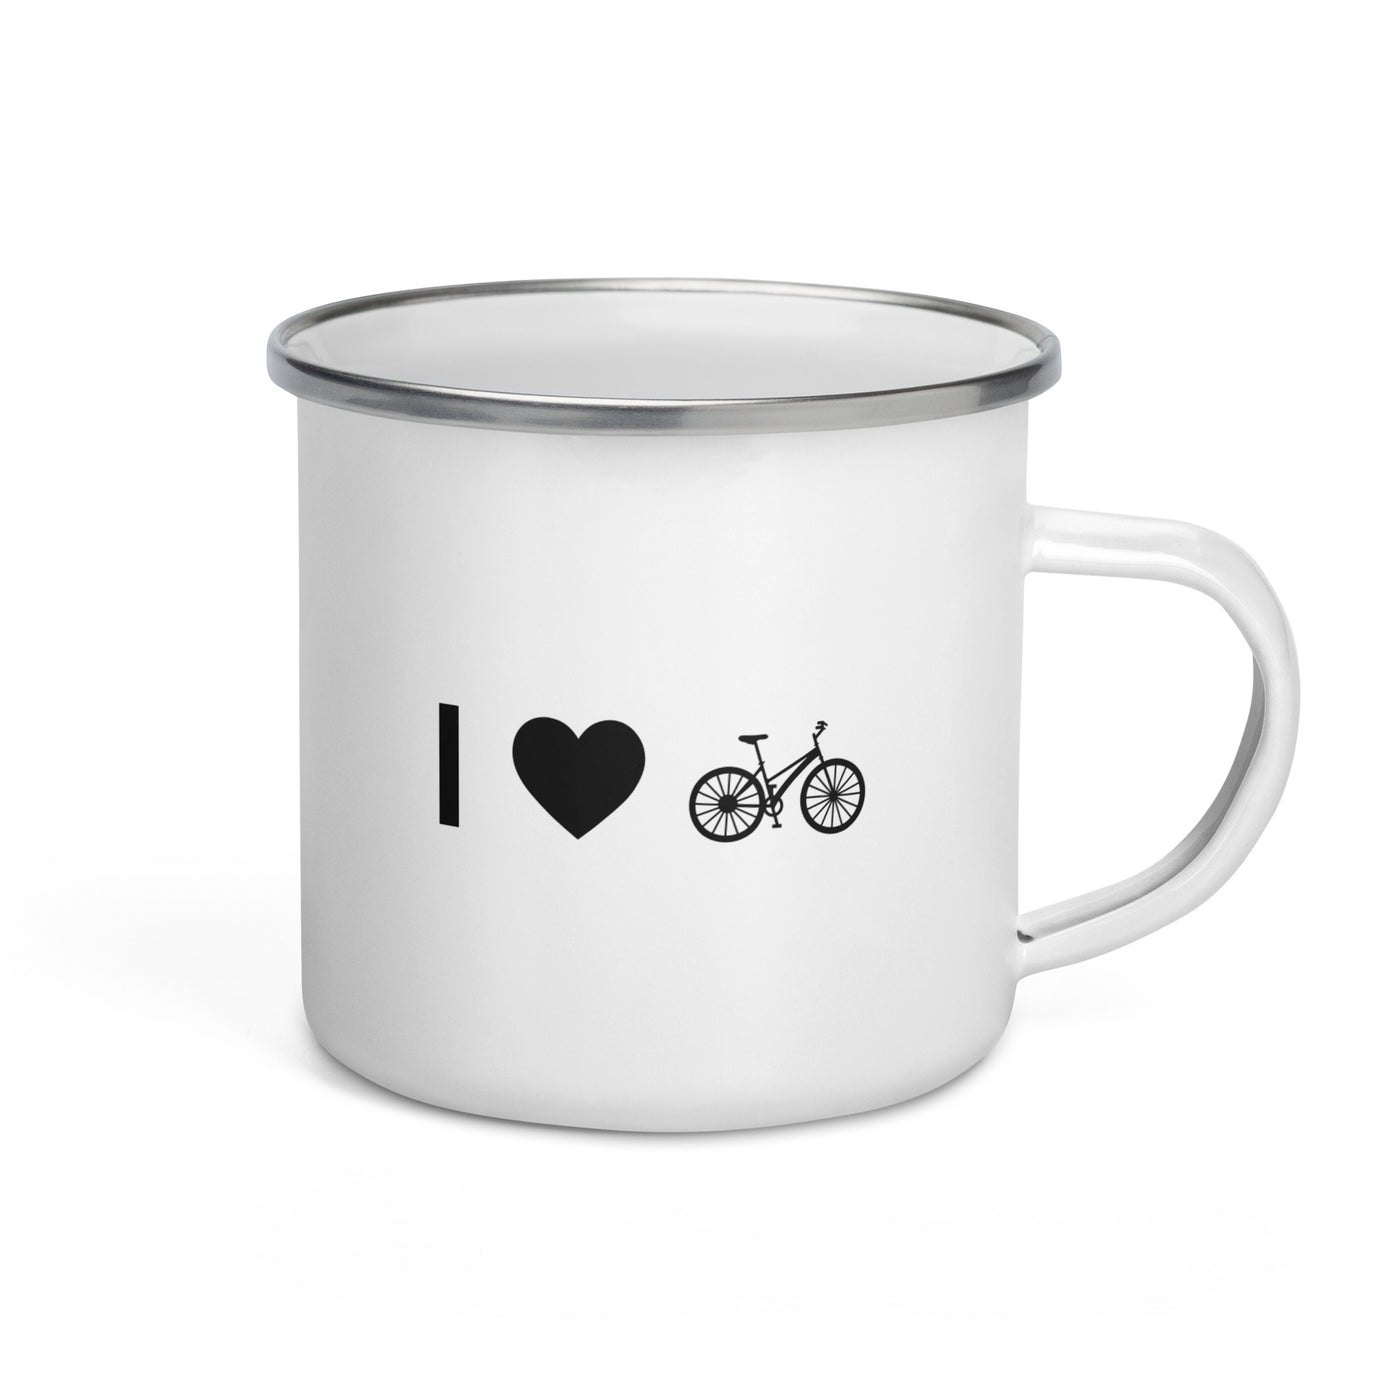 I Heart And Cycling - Emaille Tasse fahrrad Default Title